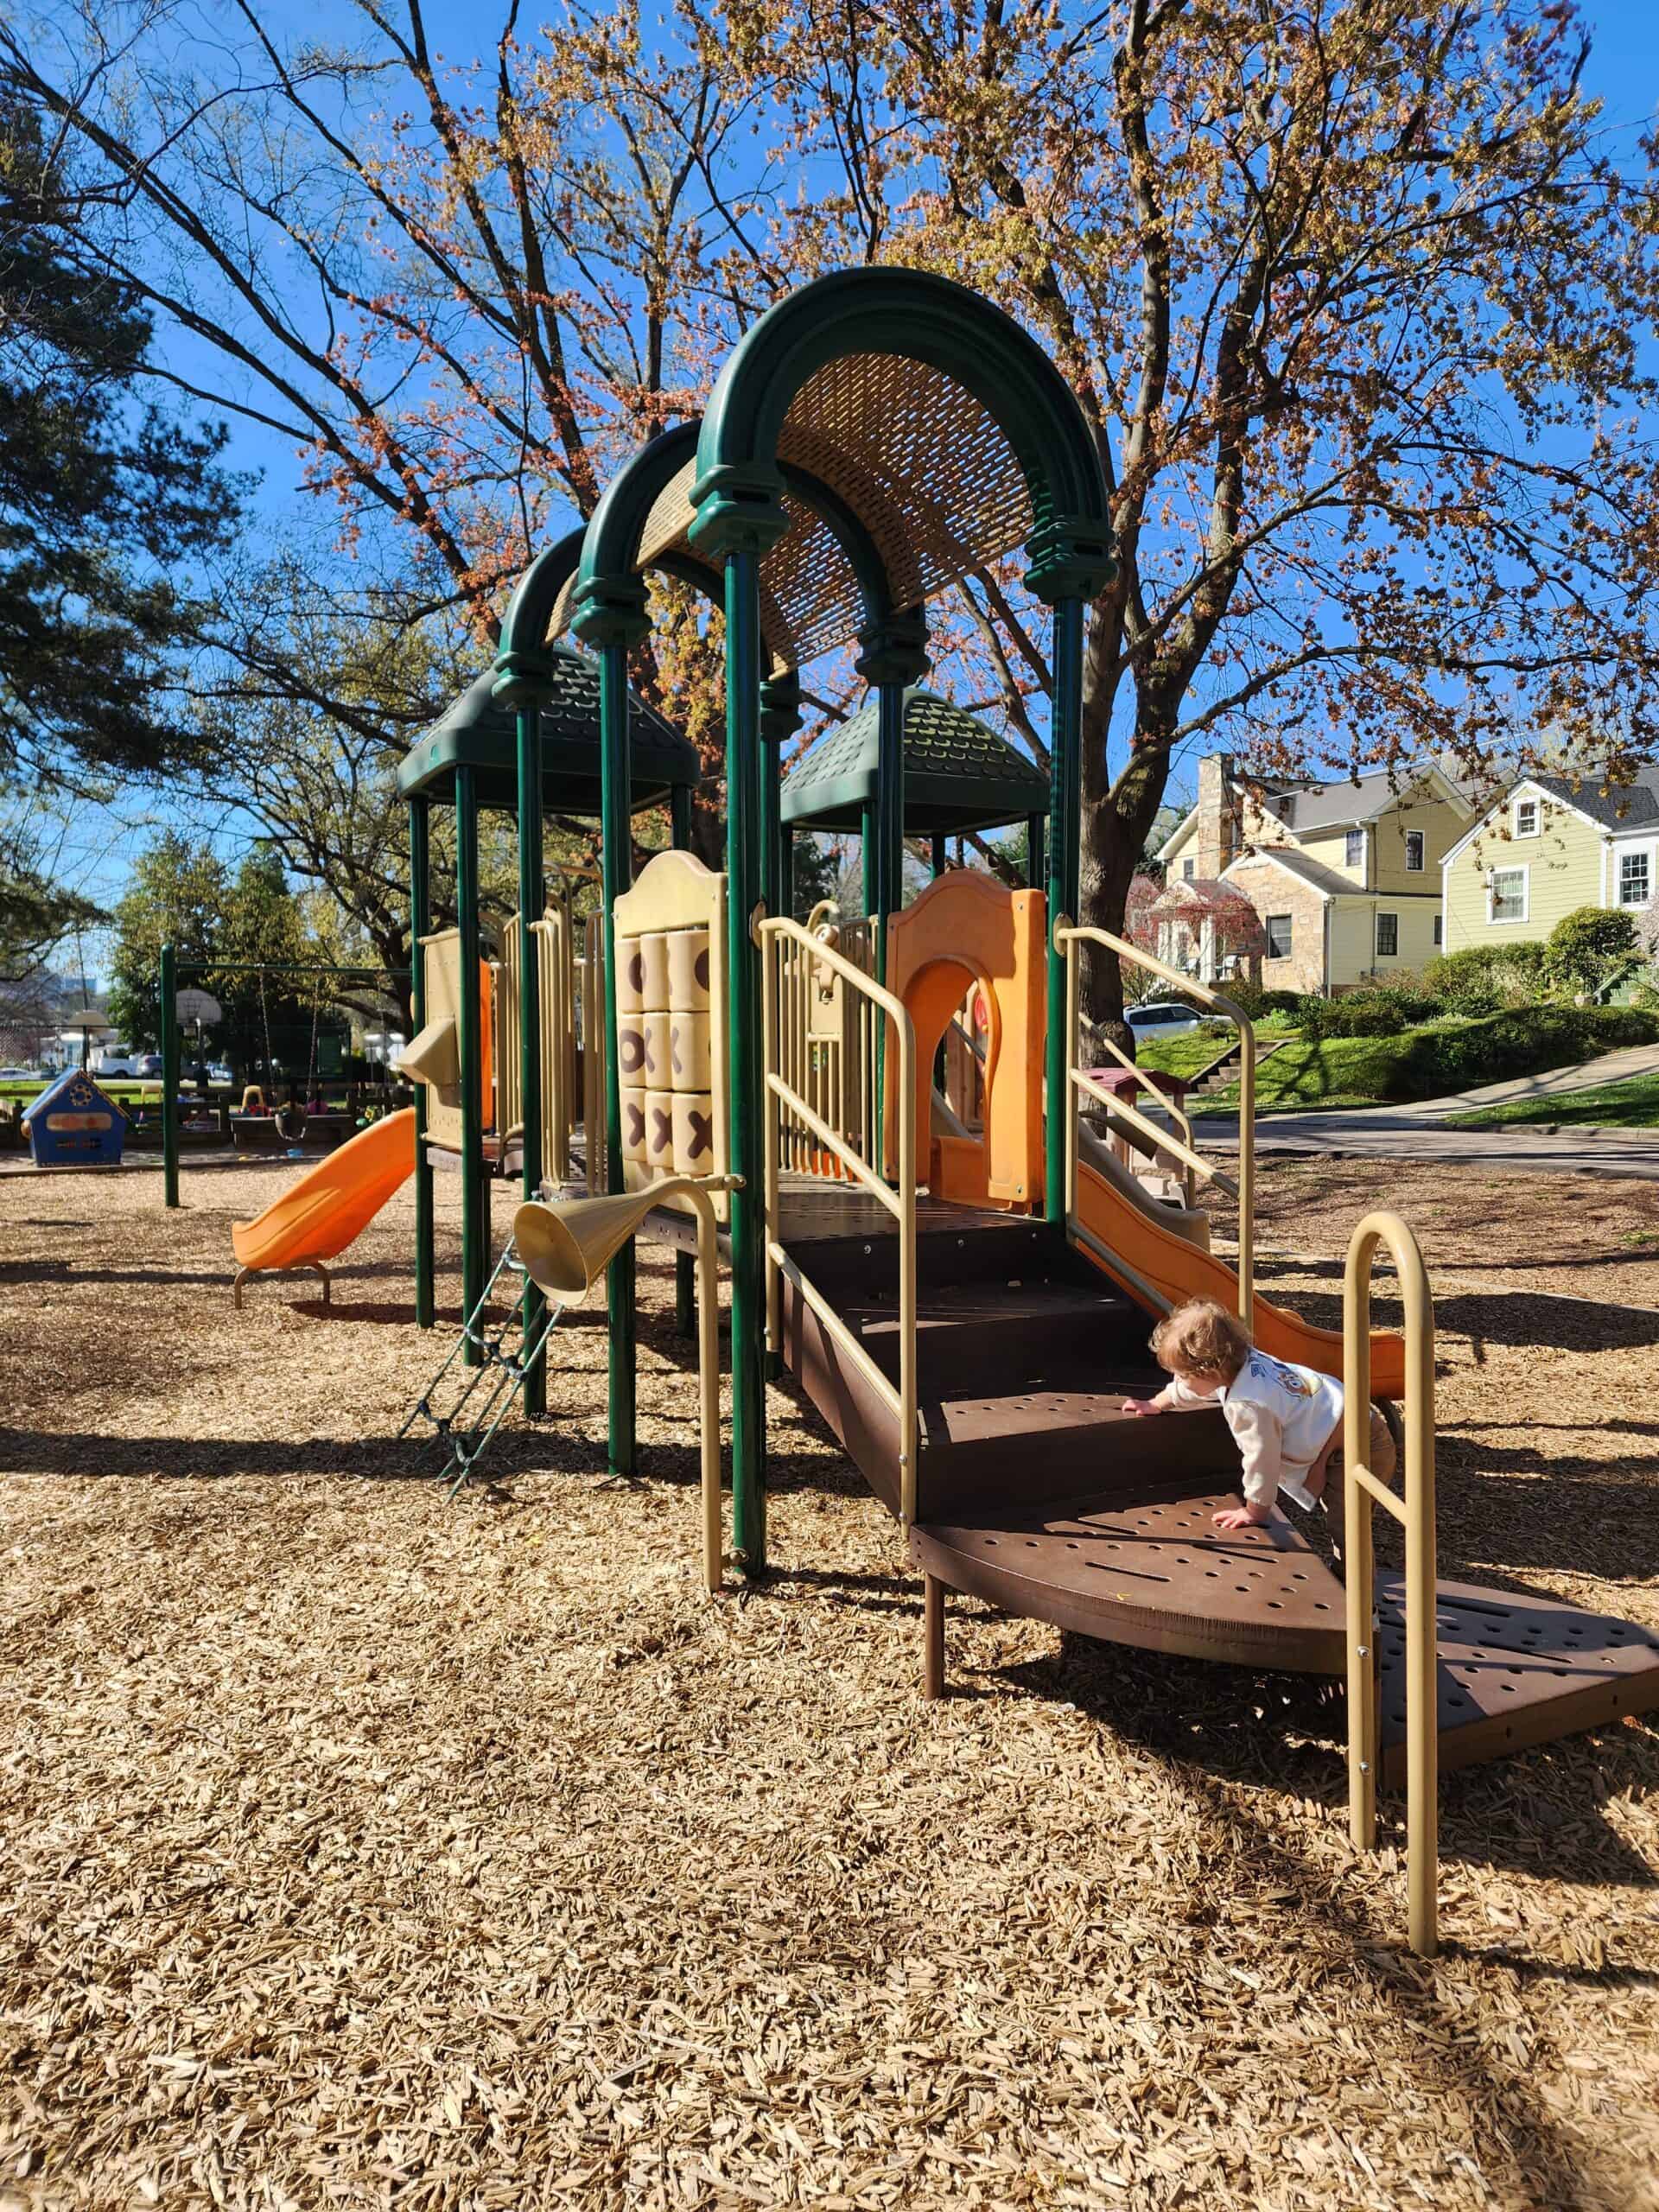 A child climbs the stairs of a colorful playground set with slides and climbing structures on a sunny day, surrounded by wood chips and with residential houses and autumn trees in the background